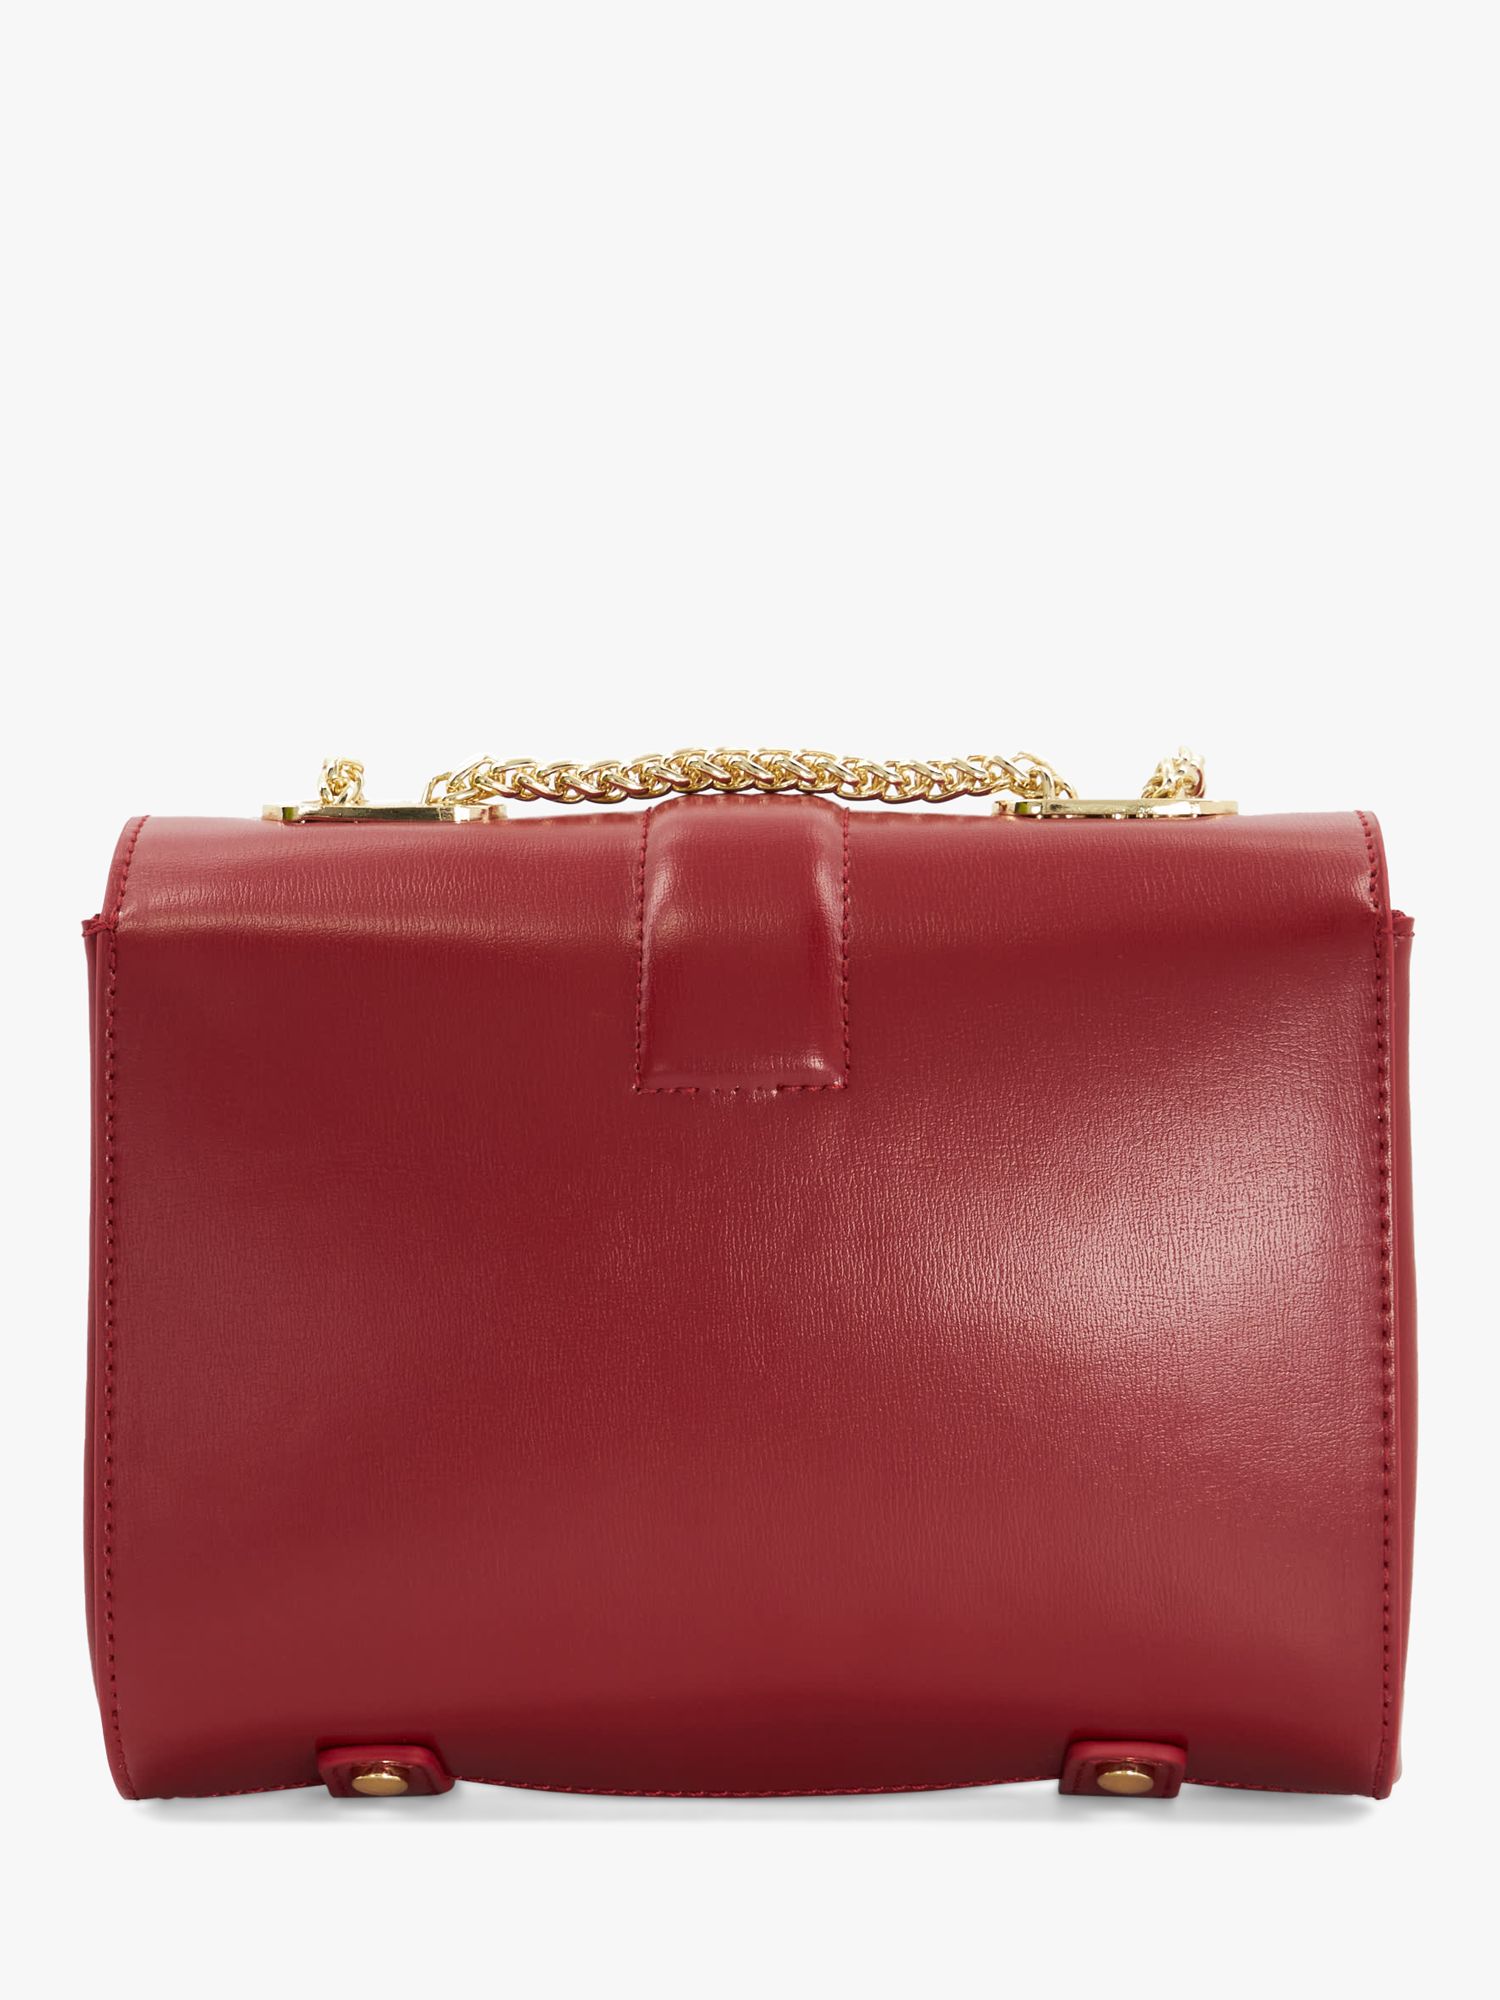 Dune Definitive Chain Strap Clutch Bag, Red at John Lewis & Partners